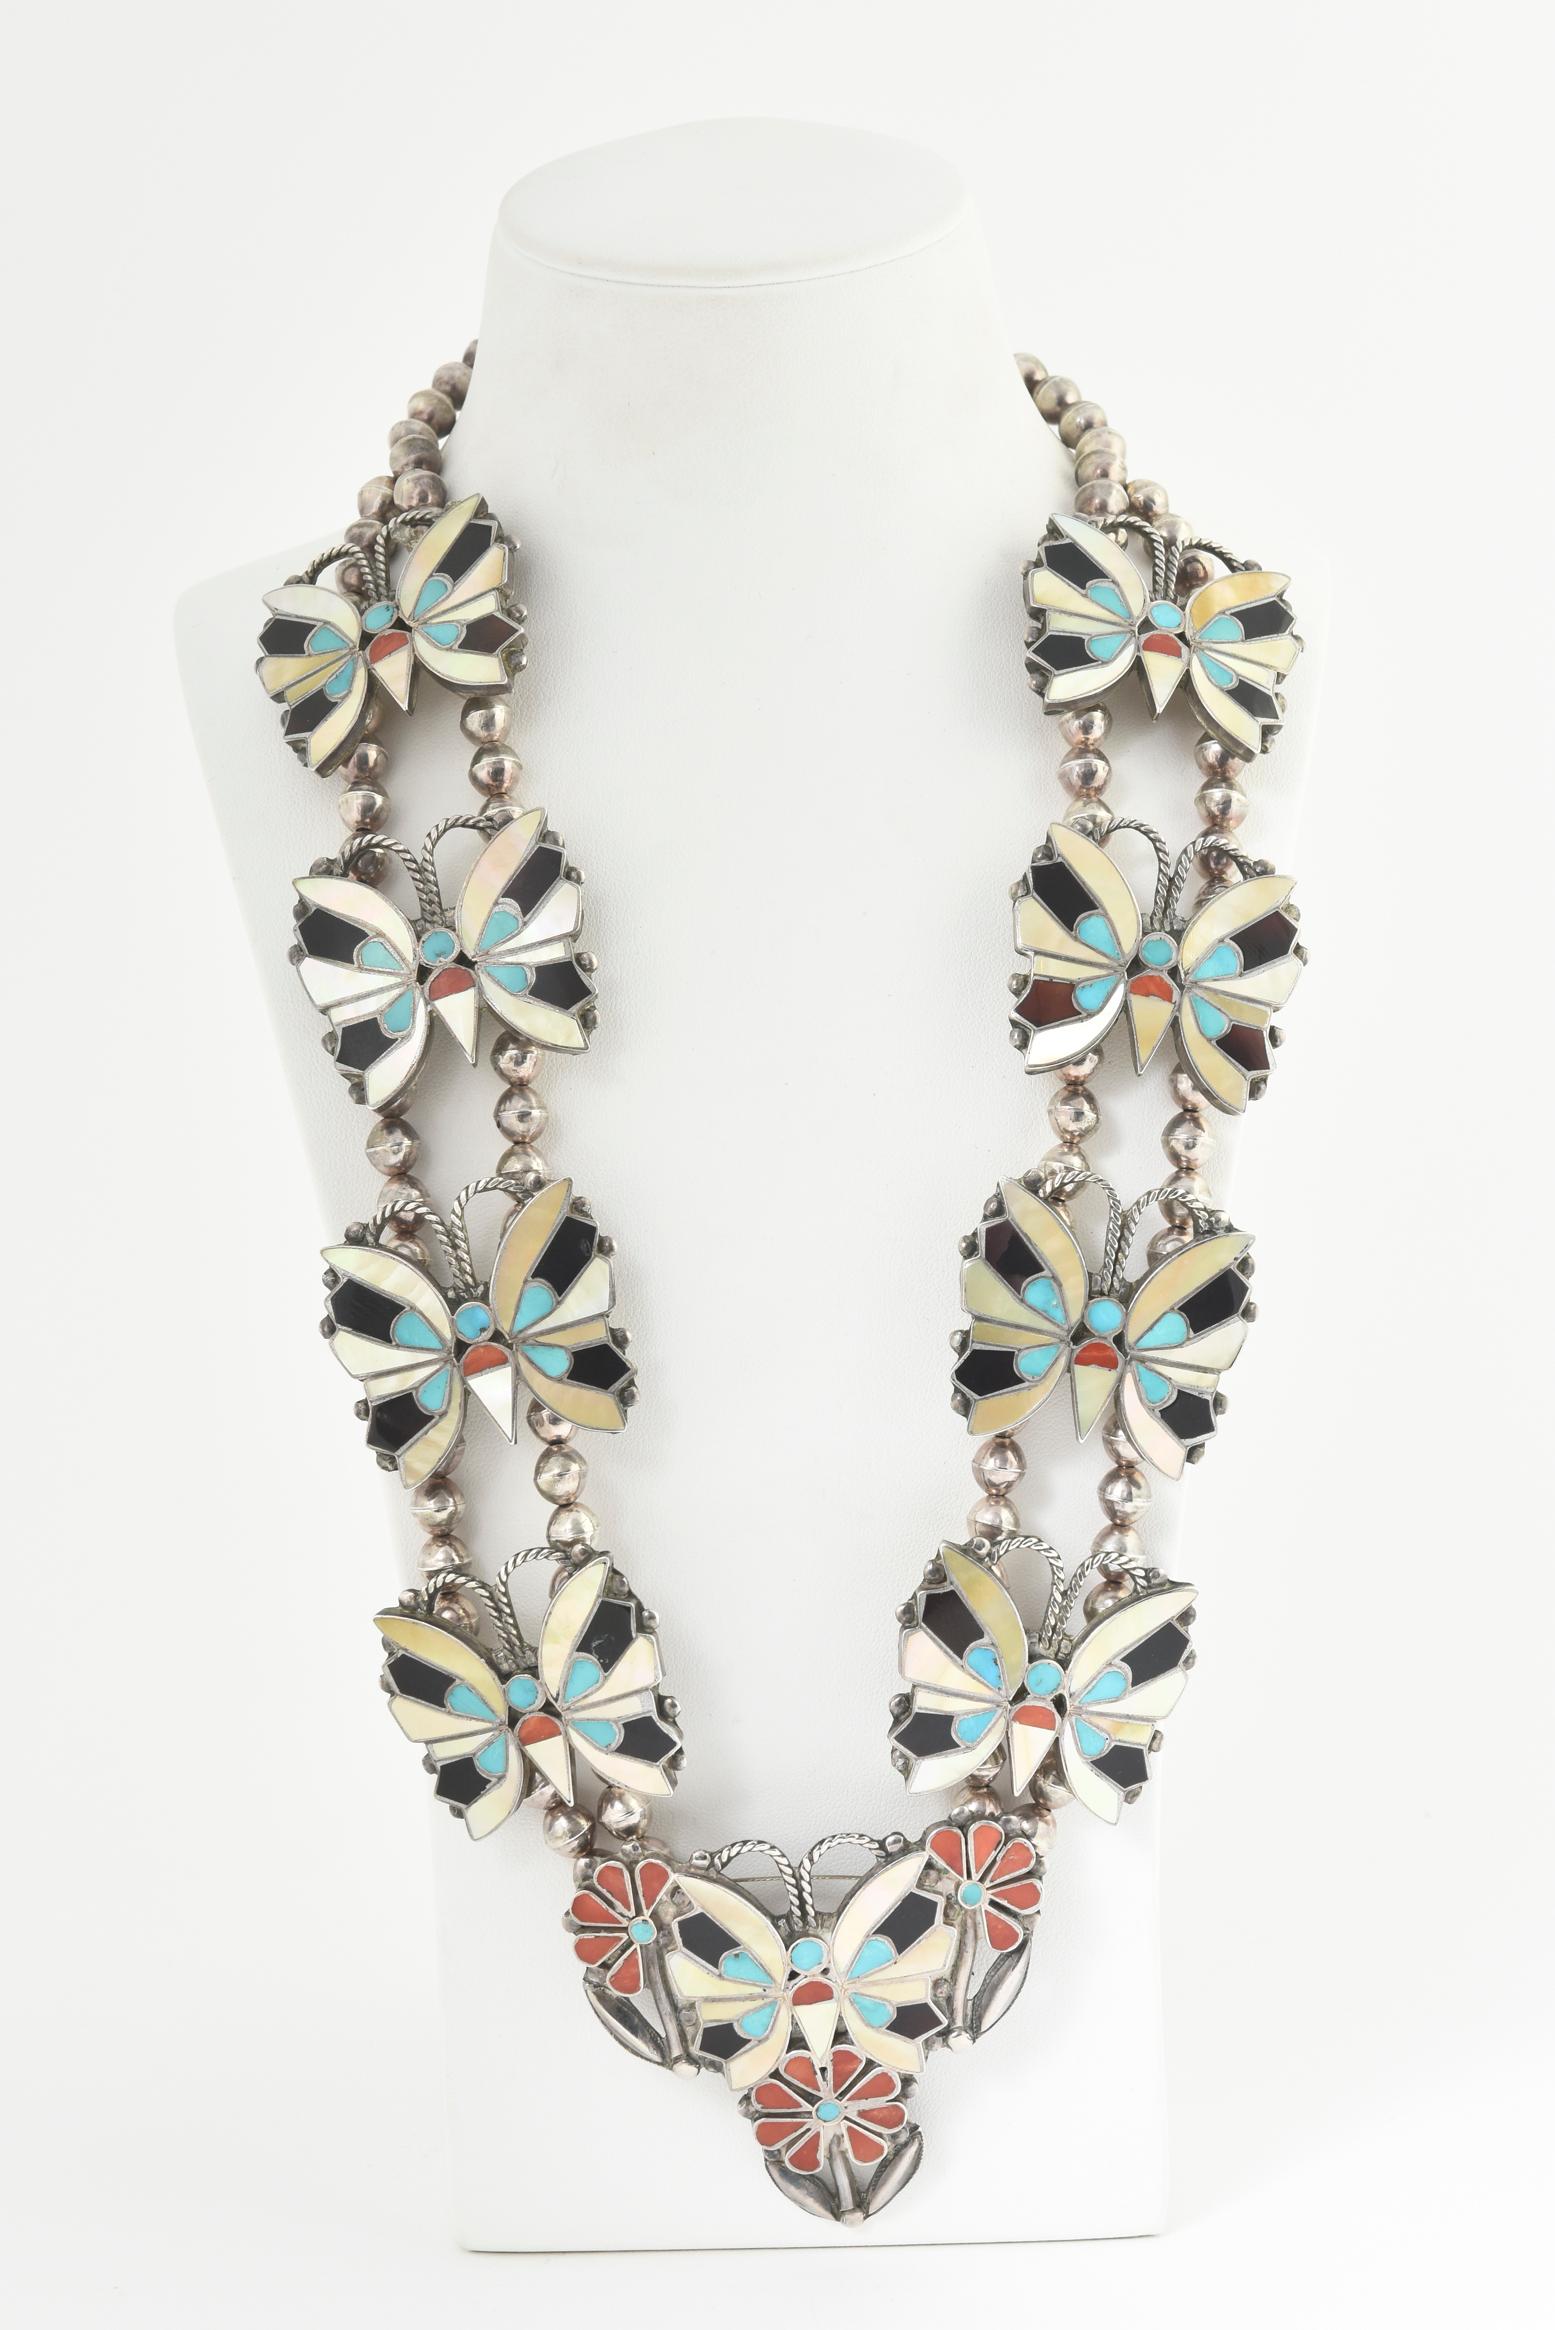 Native American Zuni Inlaid Butterfly Squash Blossom Necklace and Bracelet by Rosita Wallace